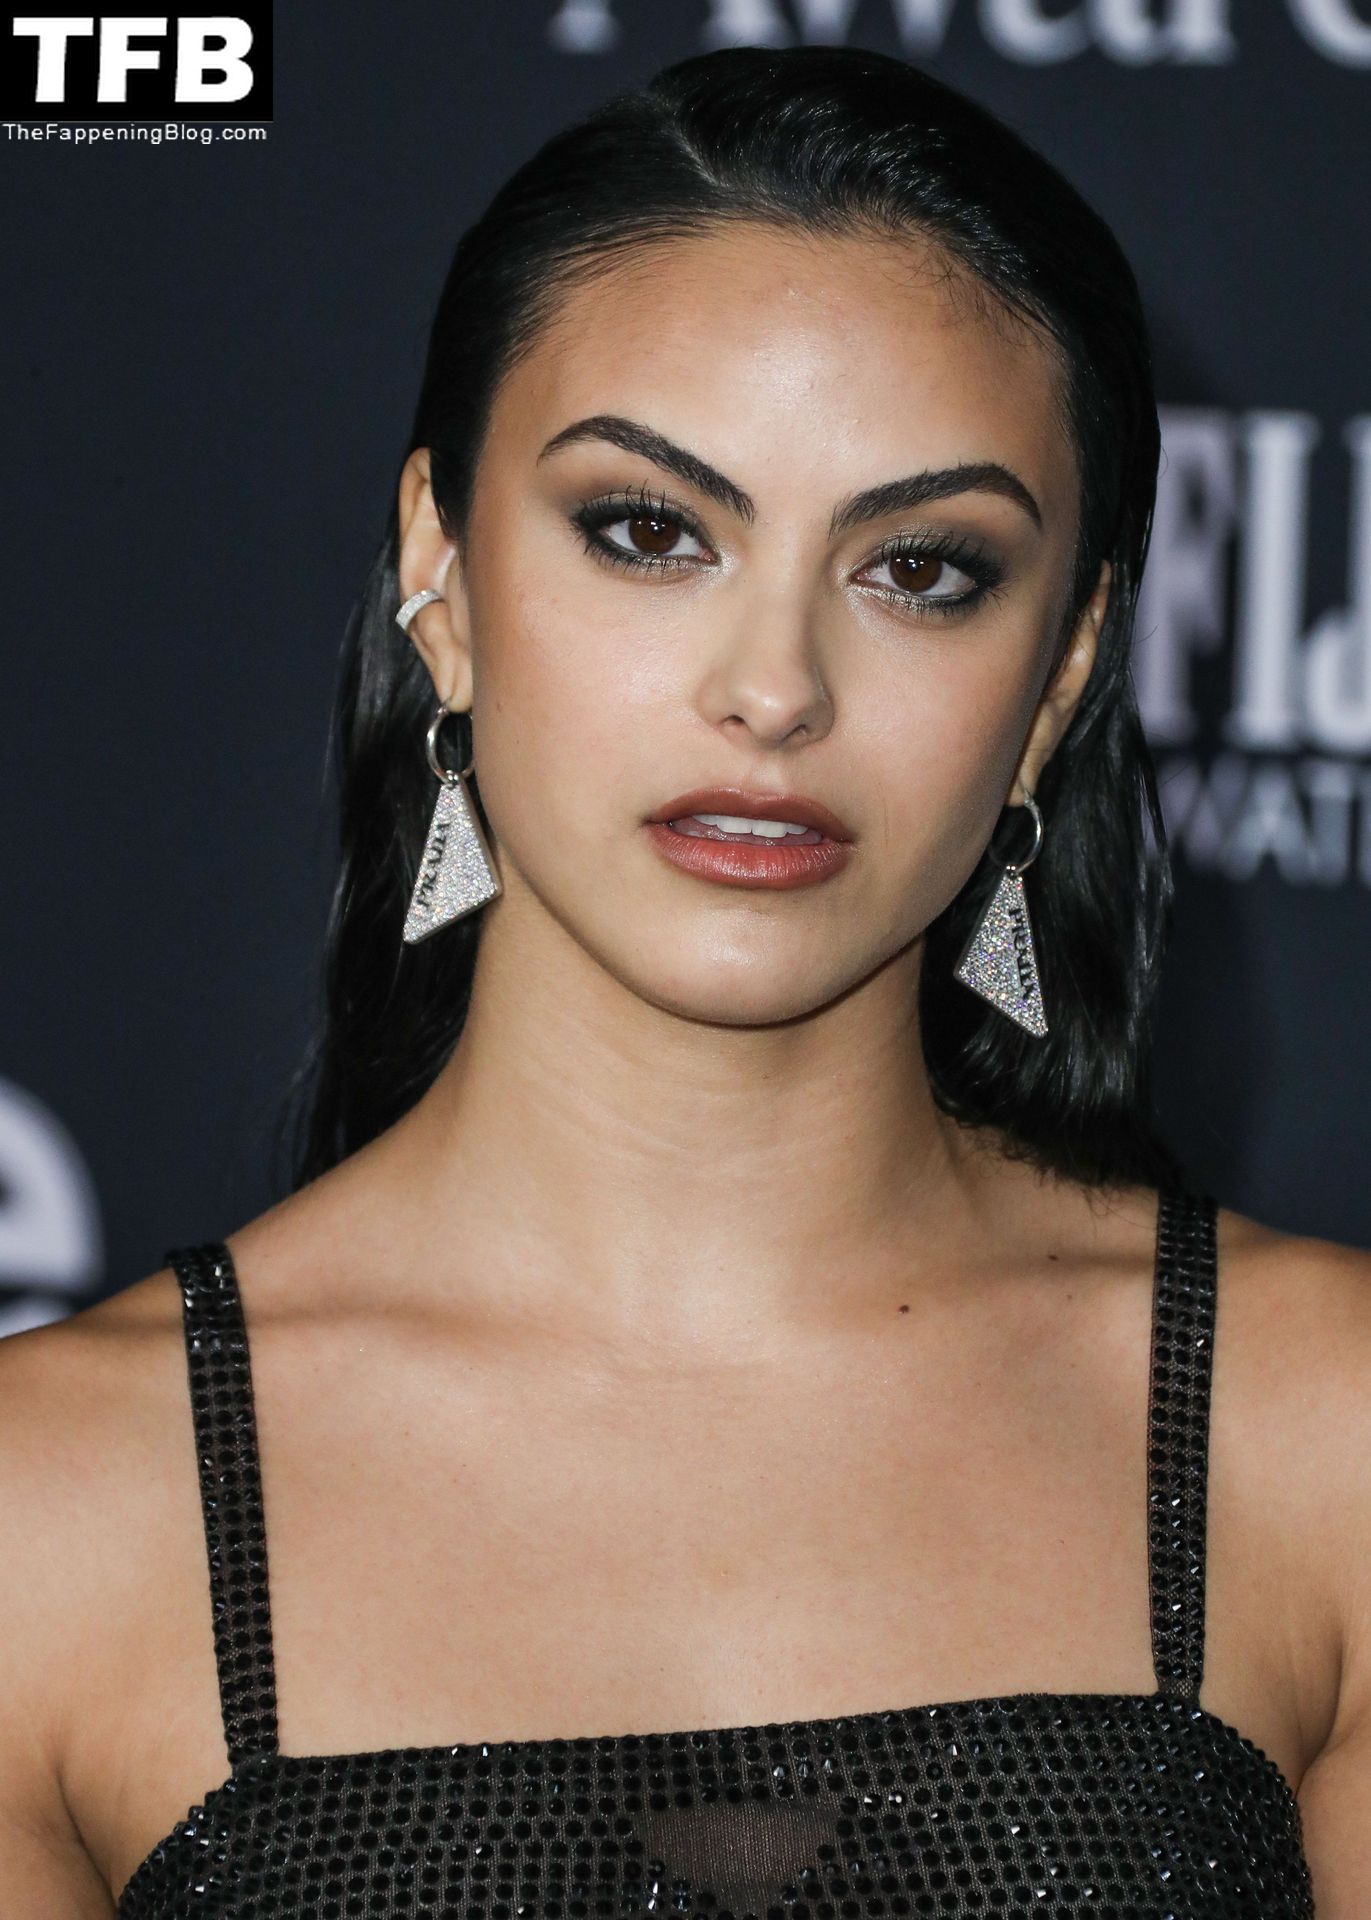 Camila-Mendes-See-Through-Tits-The-Fappening-Blog-2.jpg